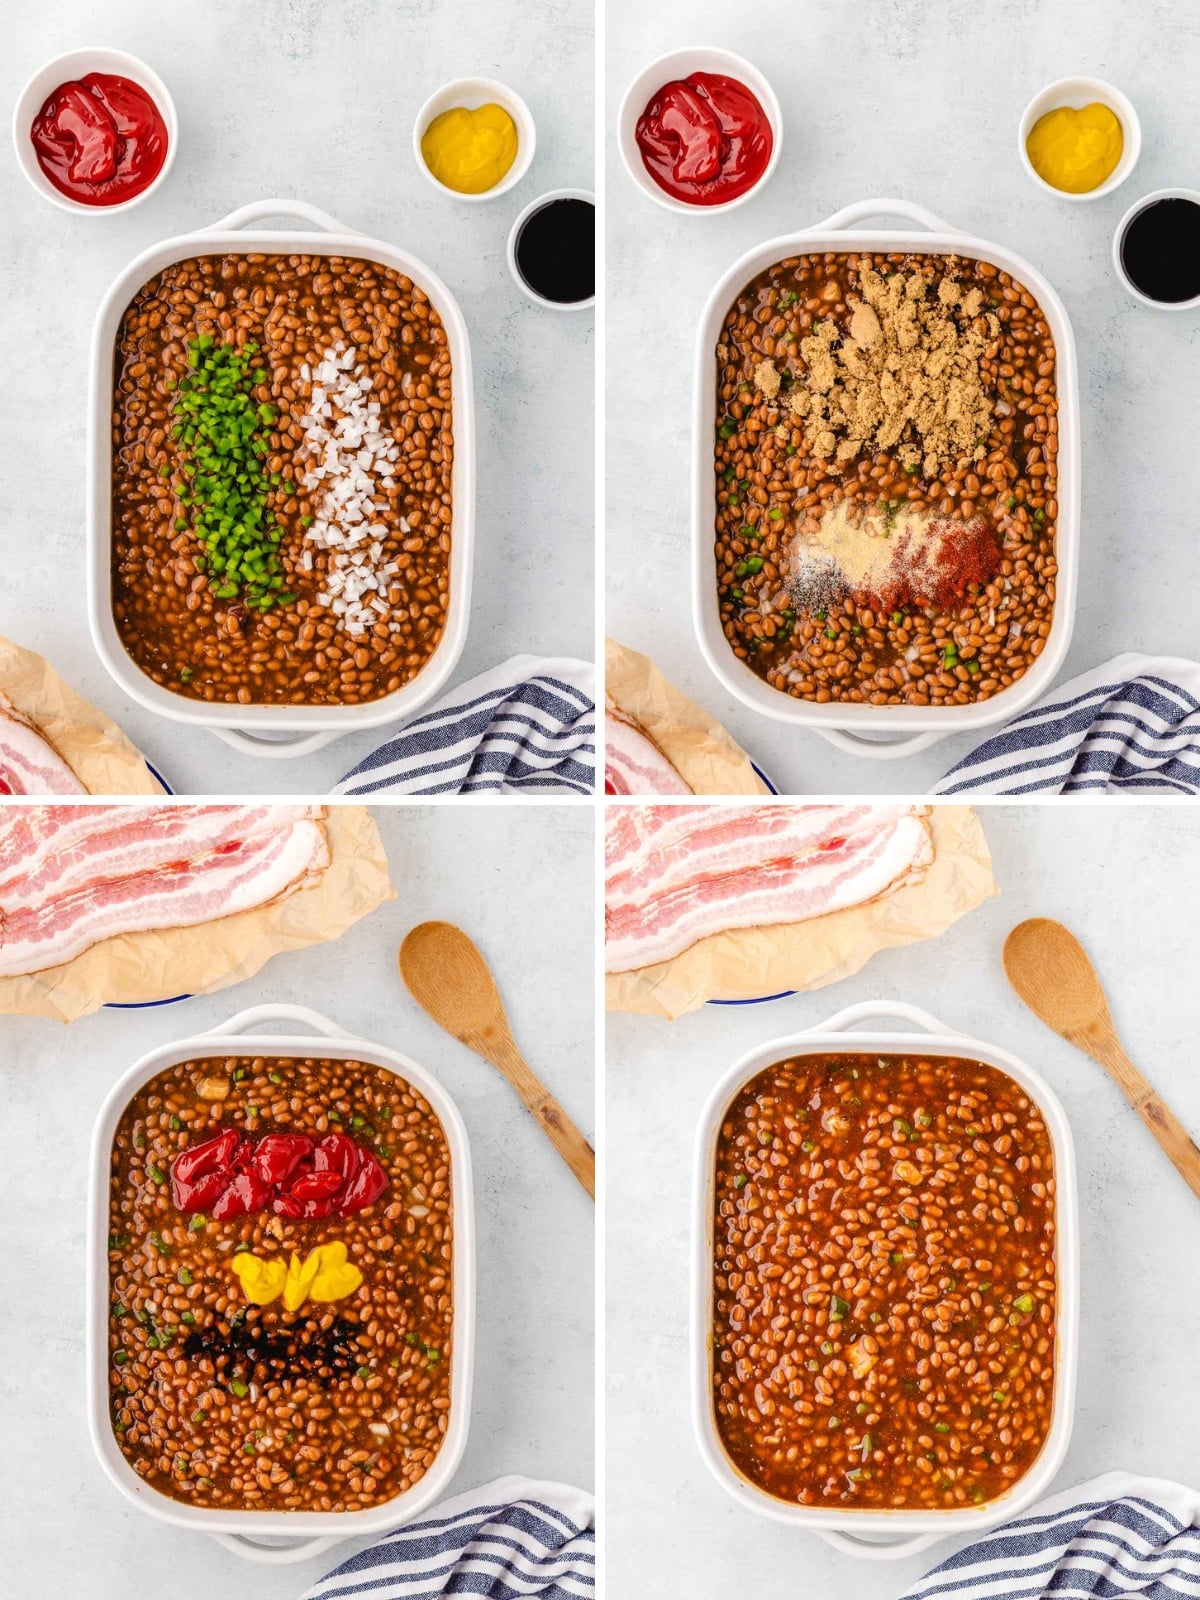 A collage image of beans in dish adding in ingredients to make baked beans.